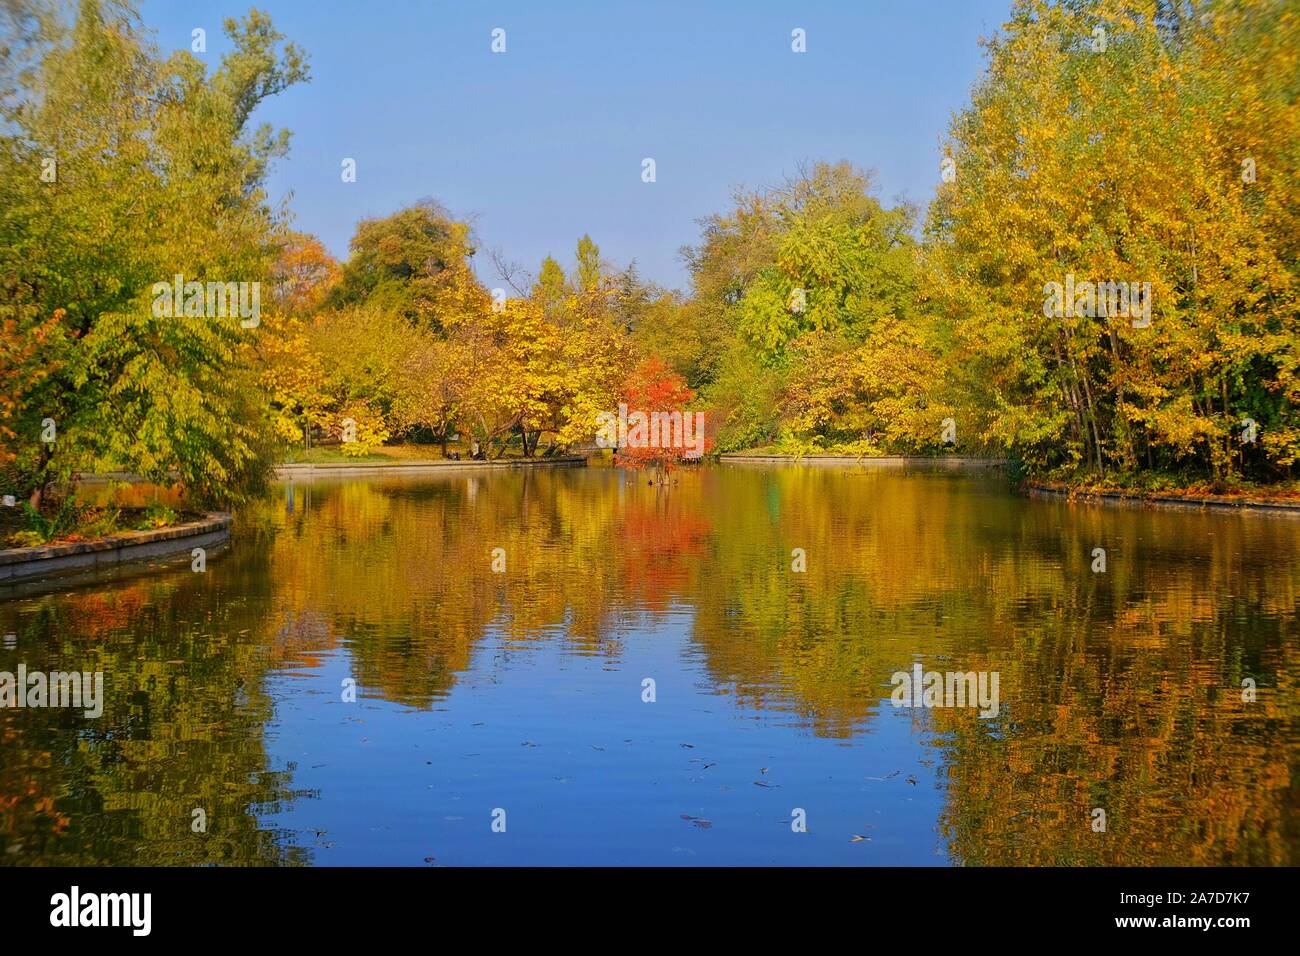 This image was taken in the botanical garden in Bucharest, Romania. Fall colors. Stock Photo